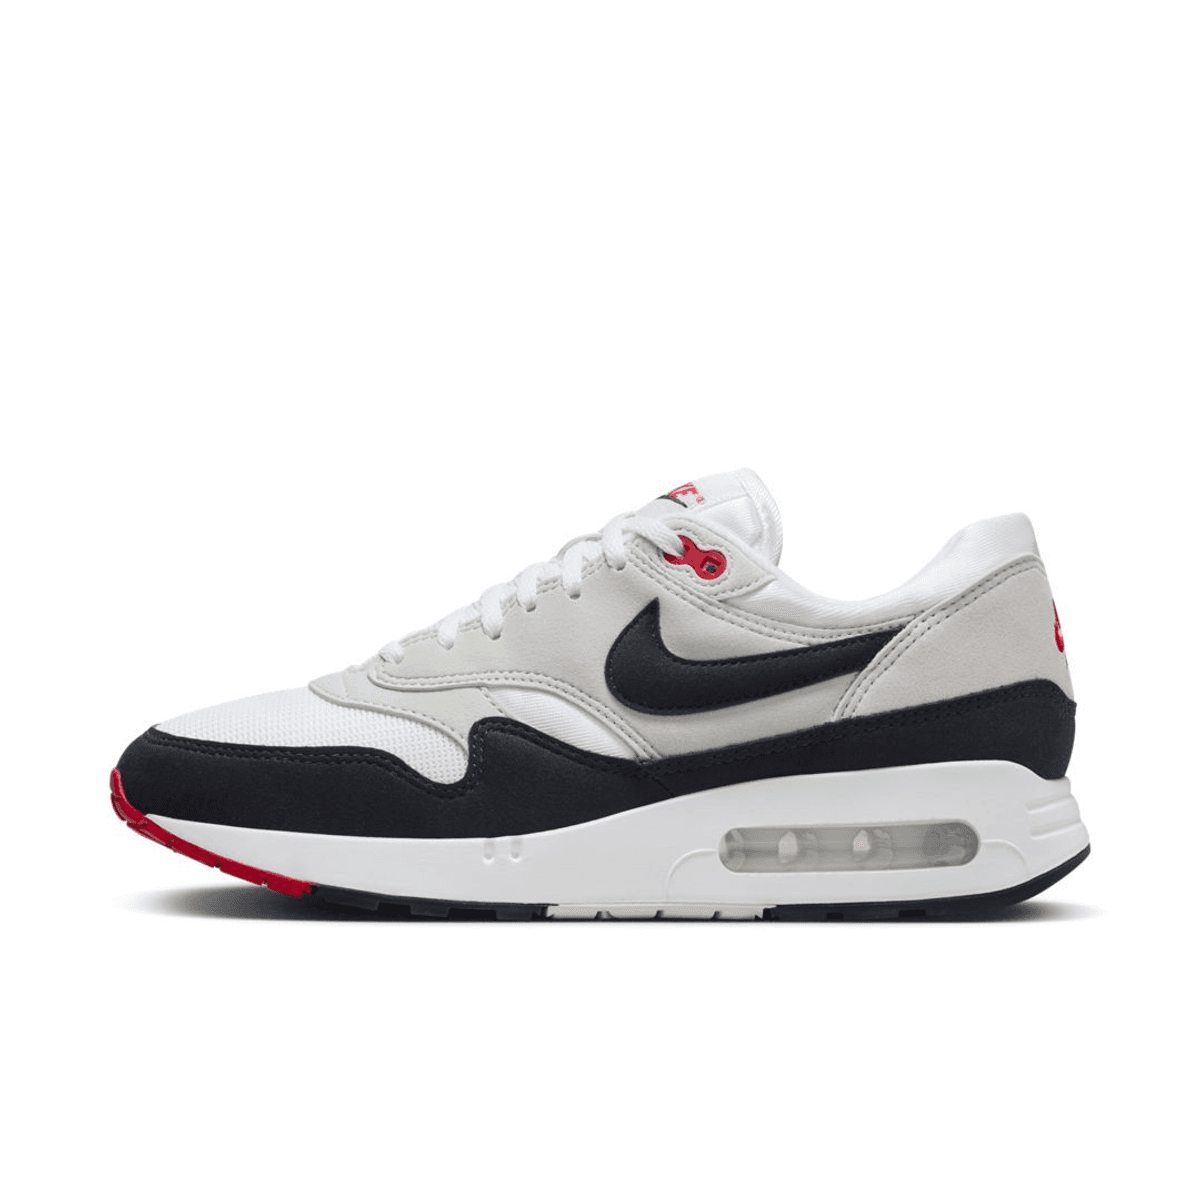 The Nike Air Max 1 '86 "Obsidian" Releases September 9th